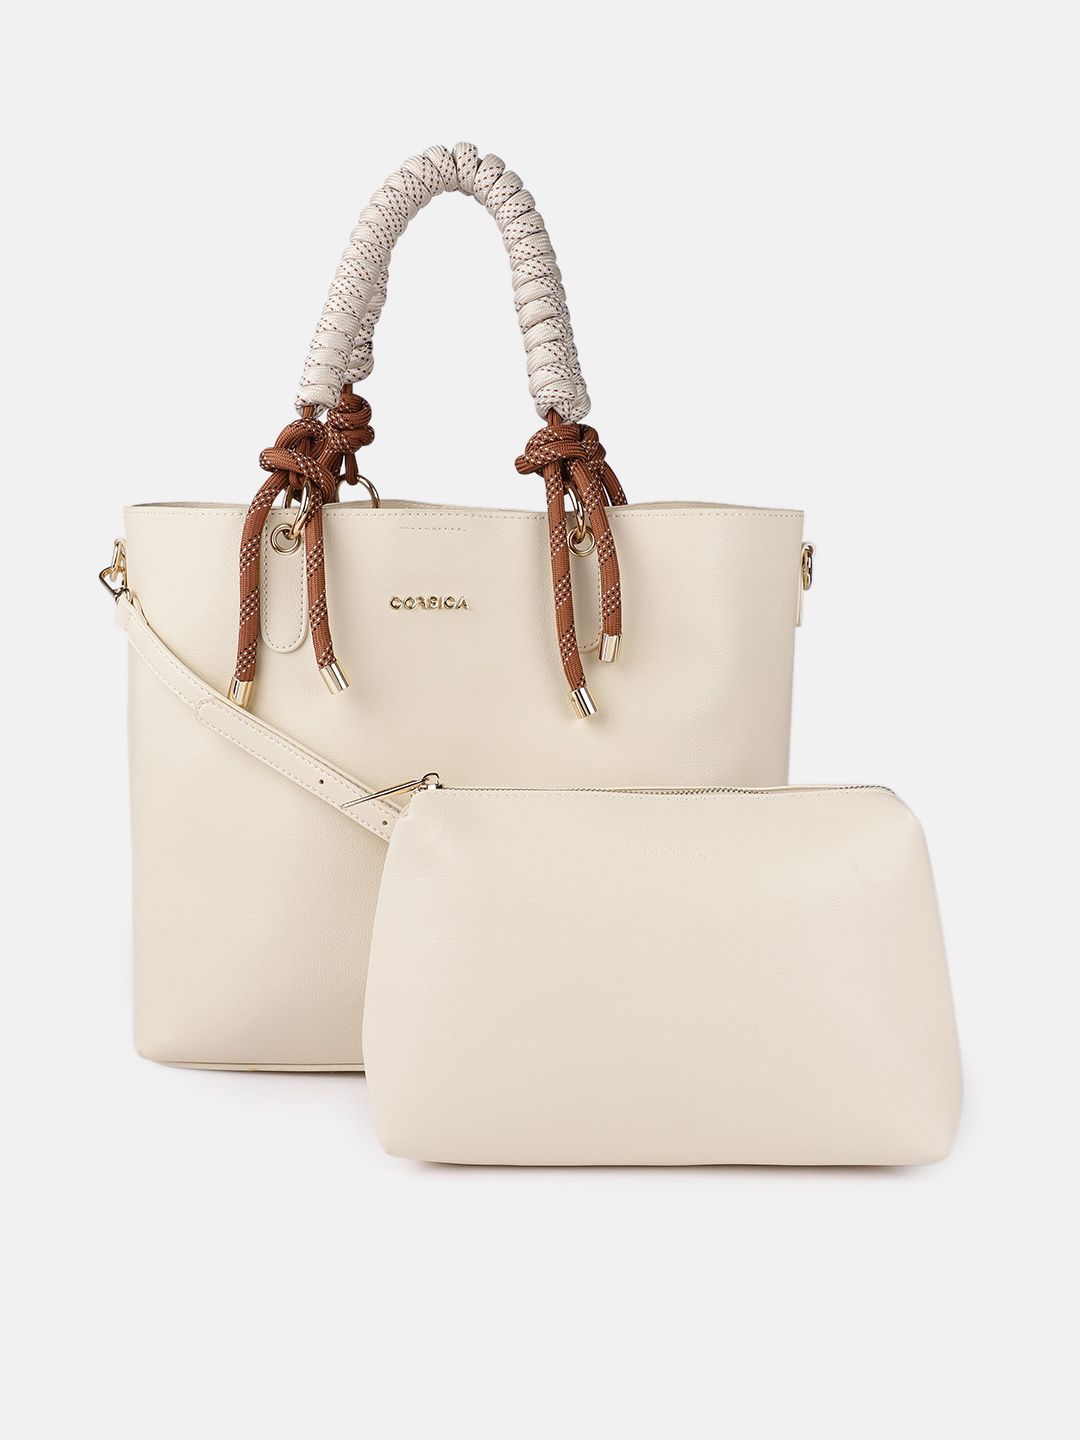 CORSICA Off White PU Structured Handheld Bag with Tasselled Price in India